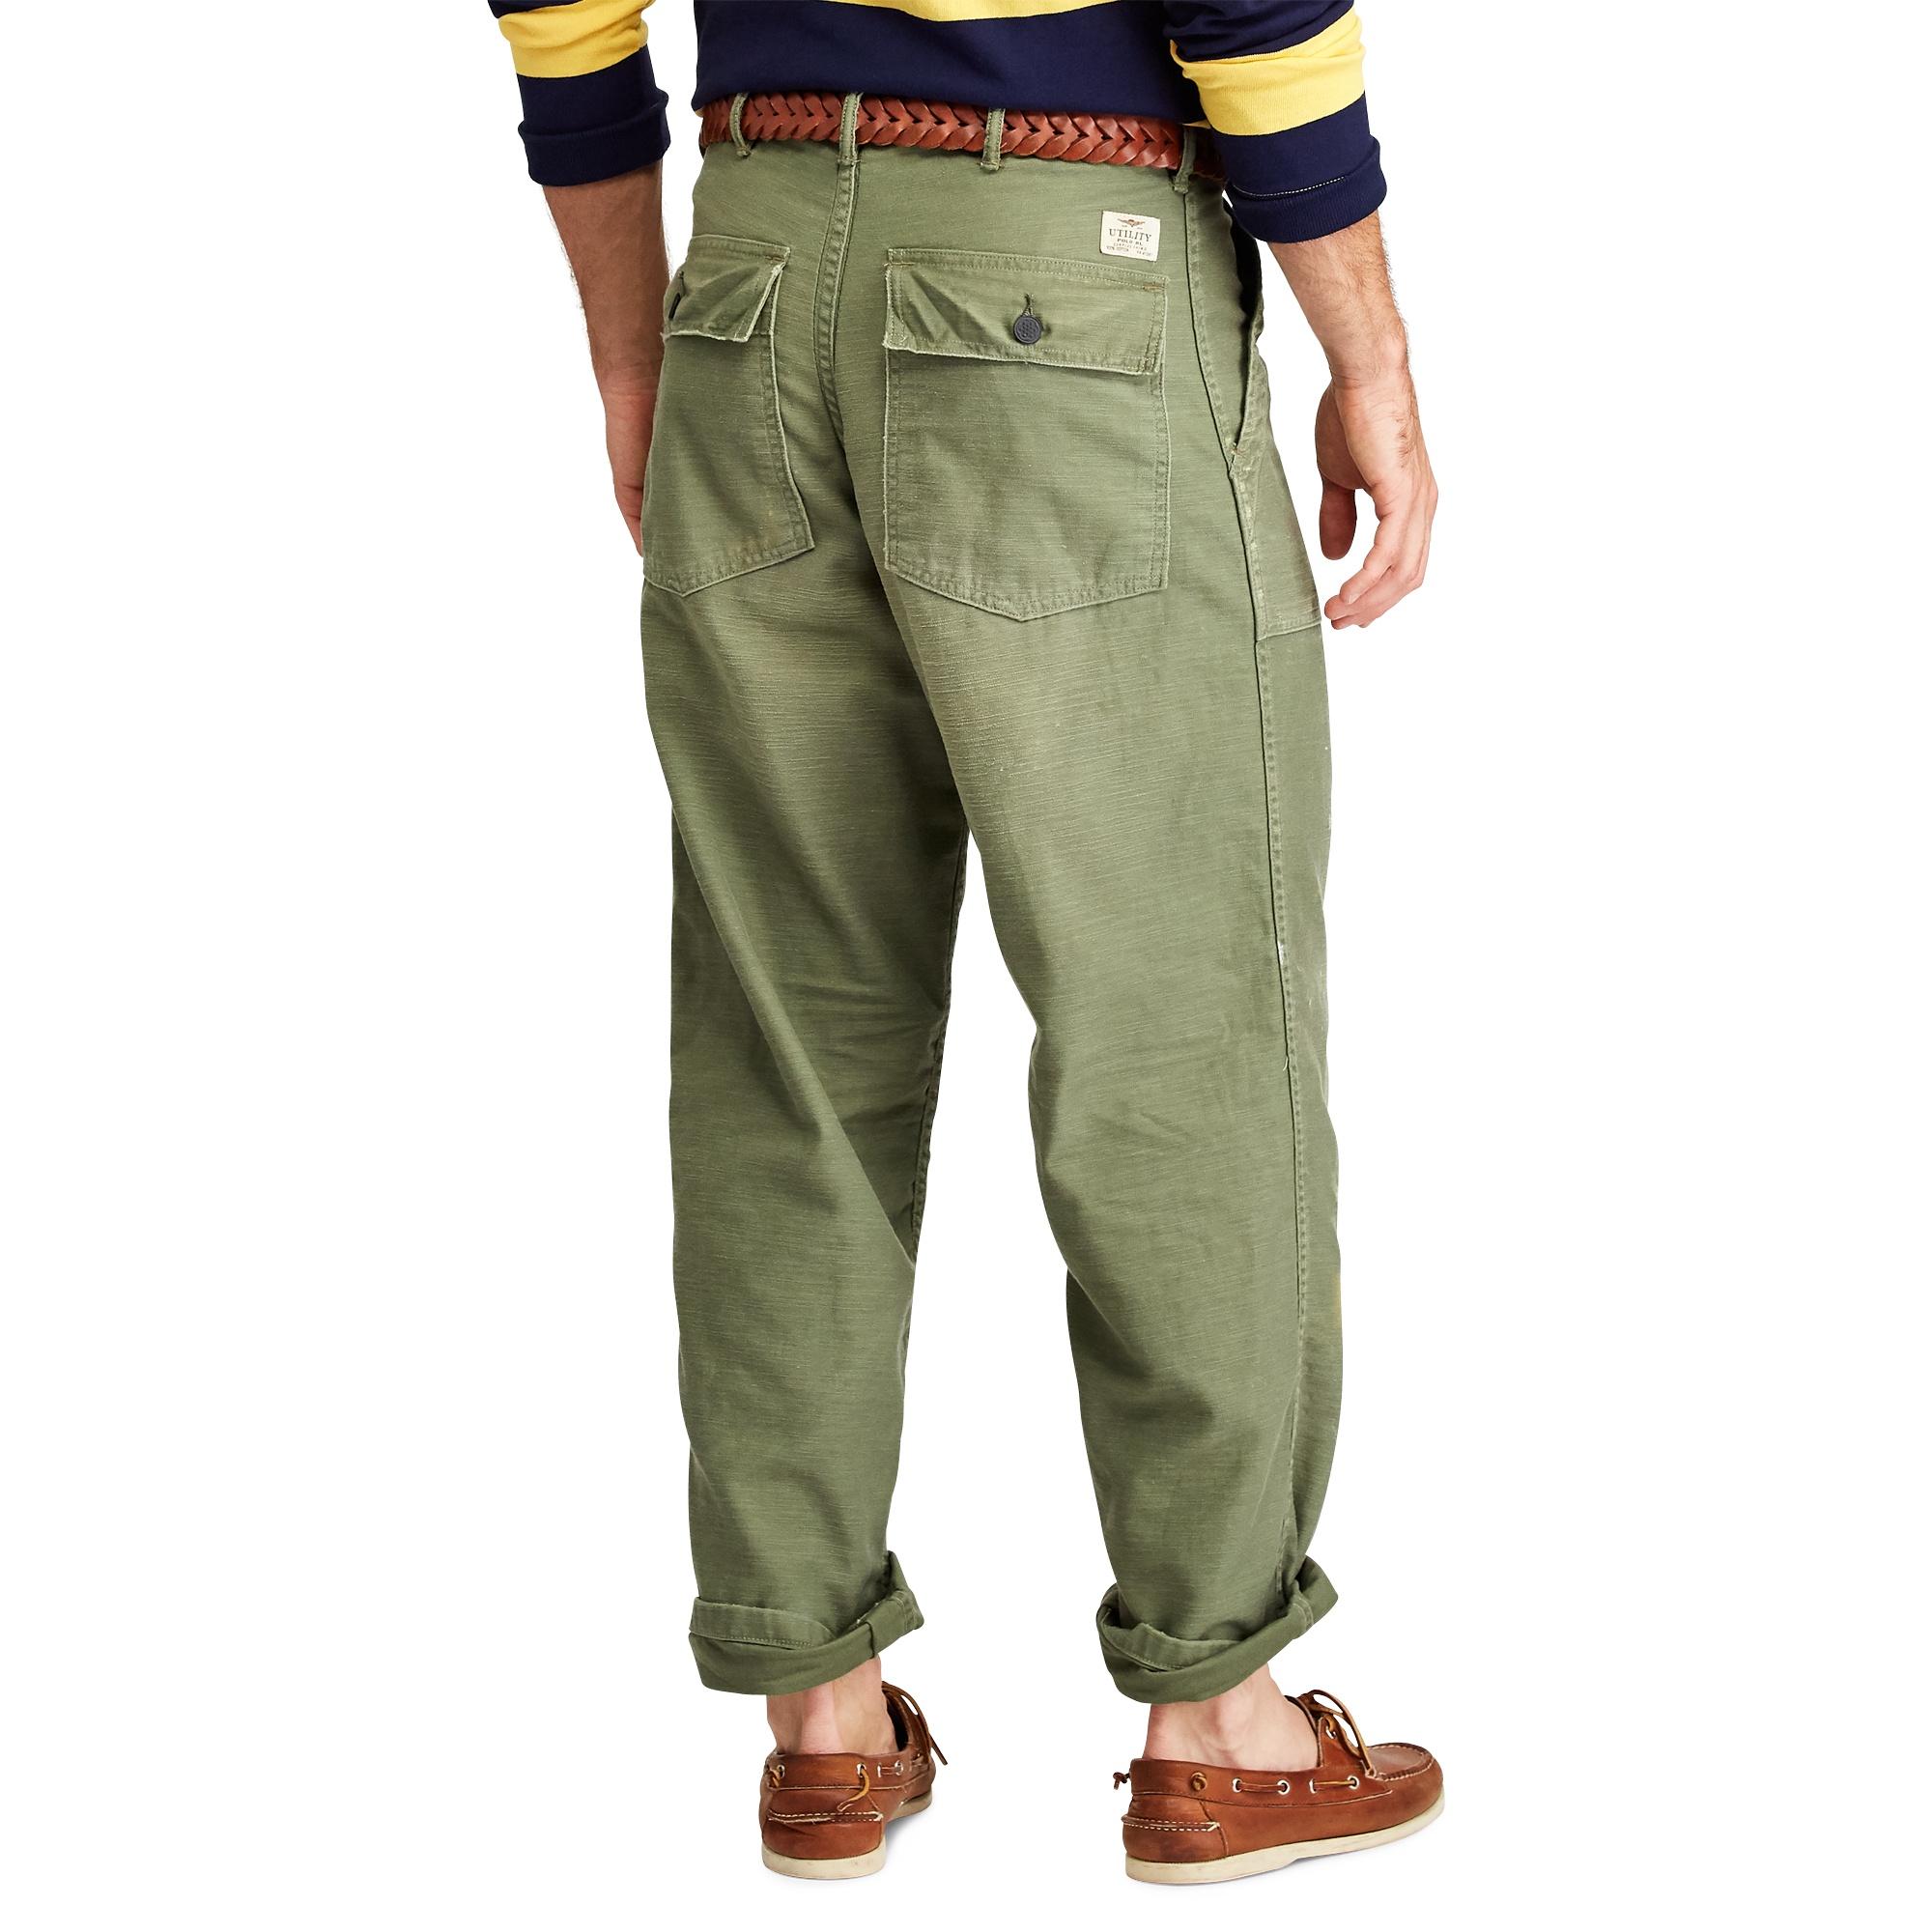 Polo Ralph Lauren Cotton Relaxed Fit Distressed Trouser in Army 